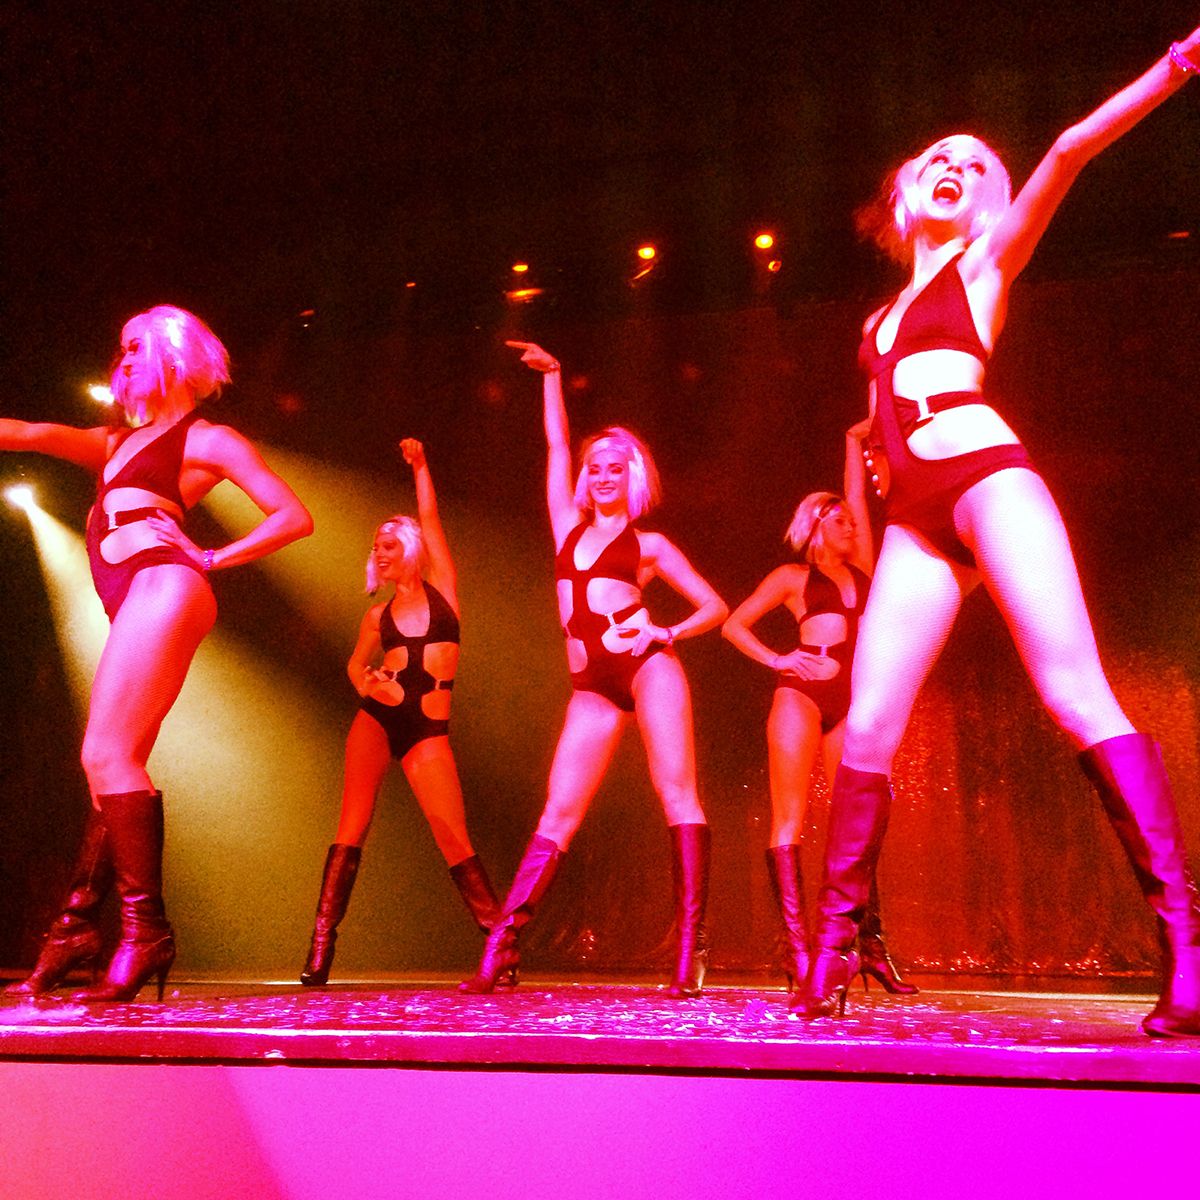 five girls on stage in black keyhole bodysuits, arms raised, bathed in pink light